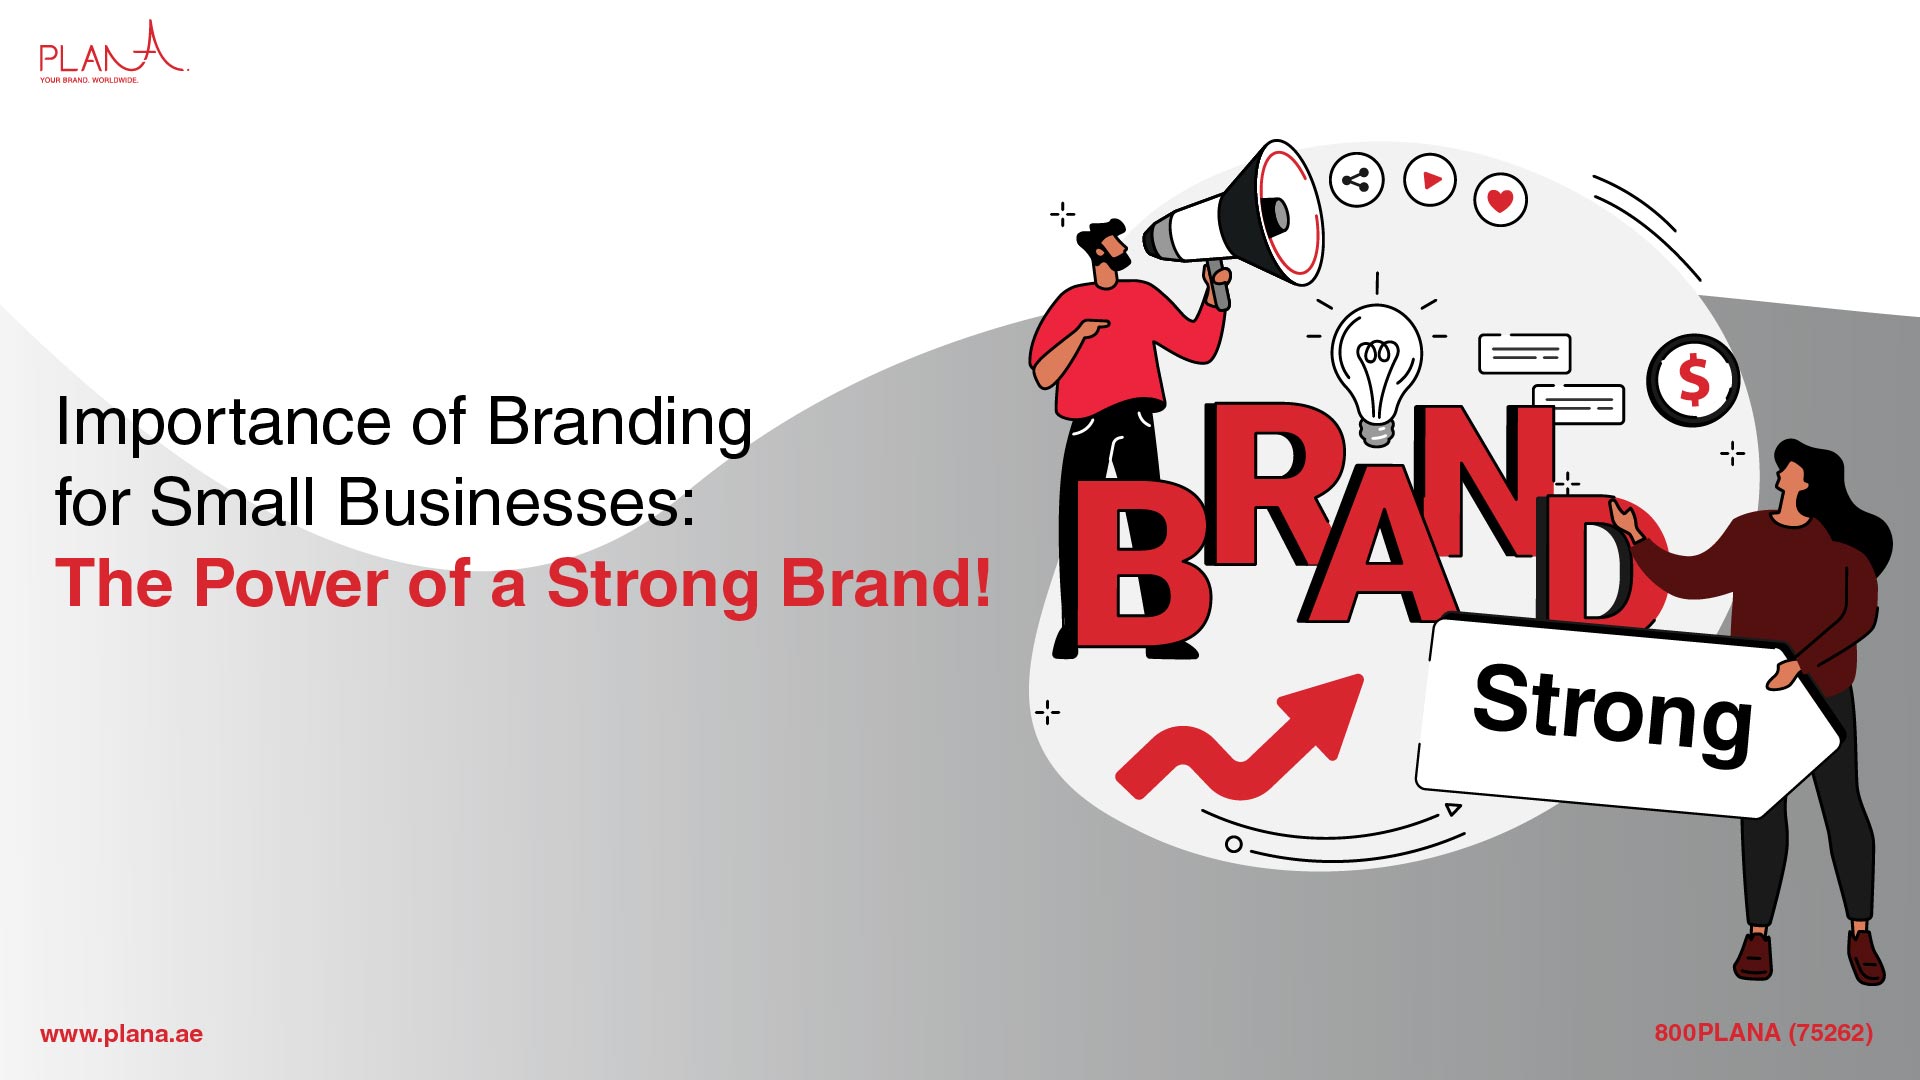 Importance of Branding for Small Businesses: The Power of a Strong Brand!